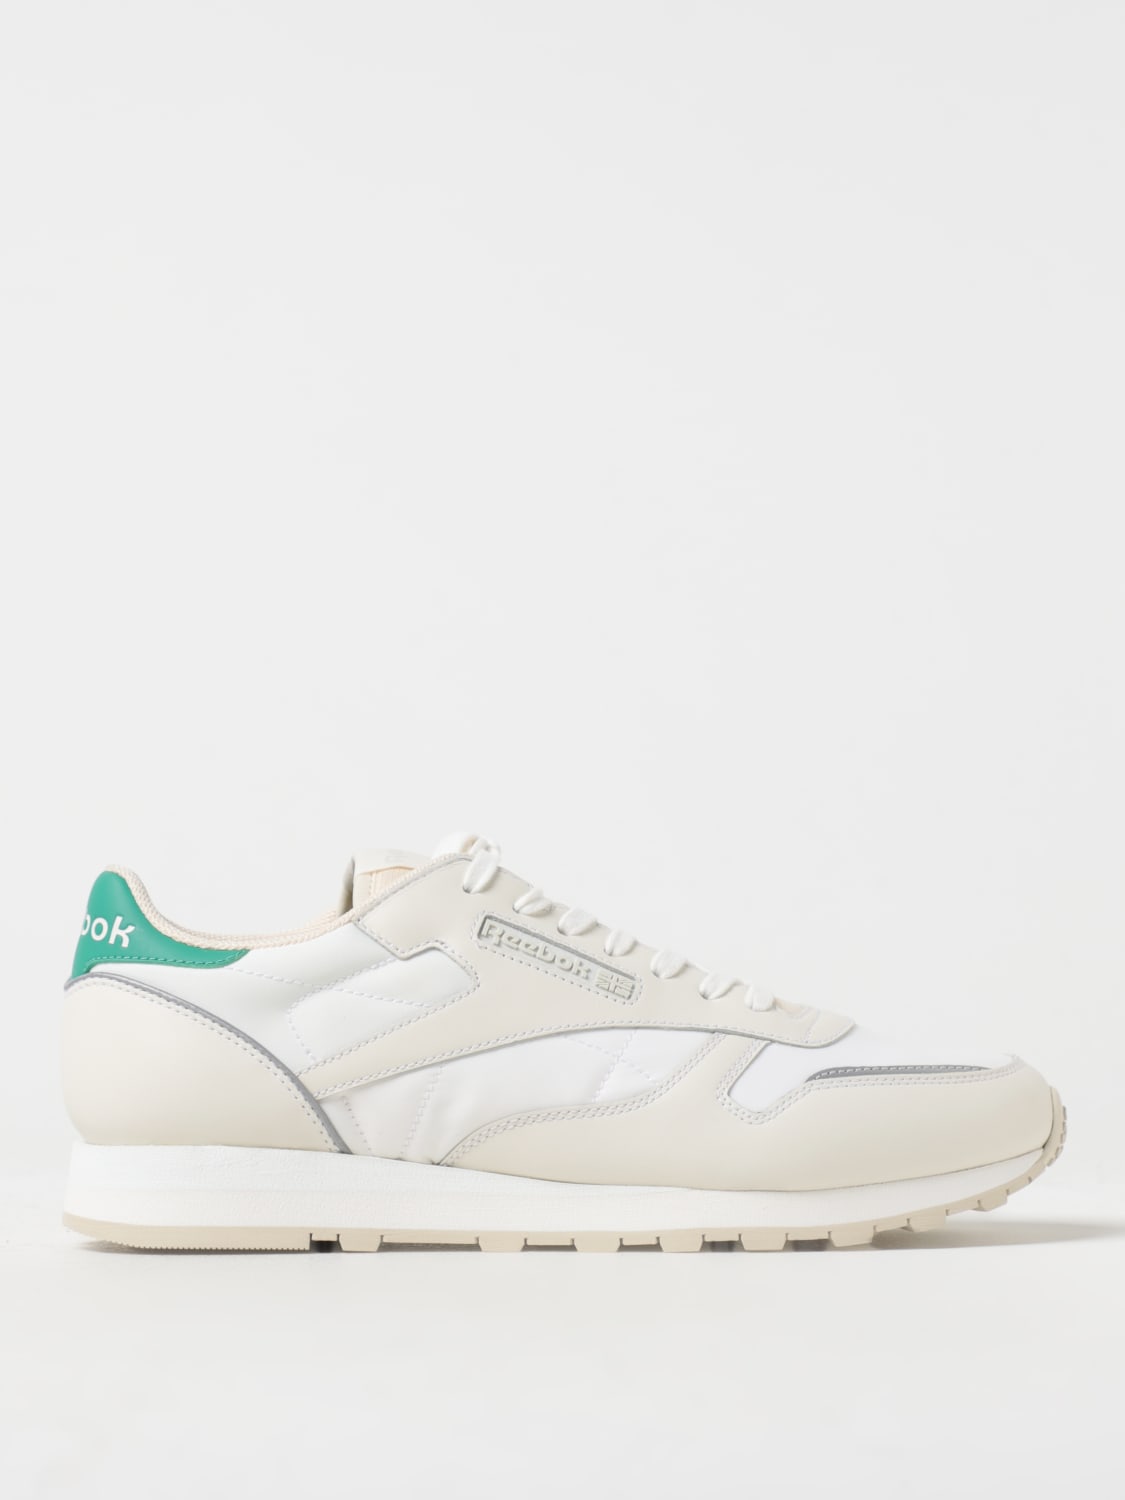 Reebok Classic CLASSIC LEATHER NYLON Green / White - Fast delivery